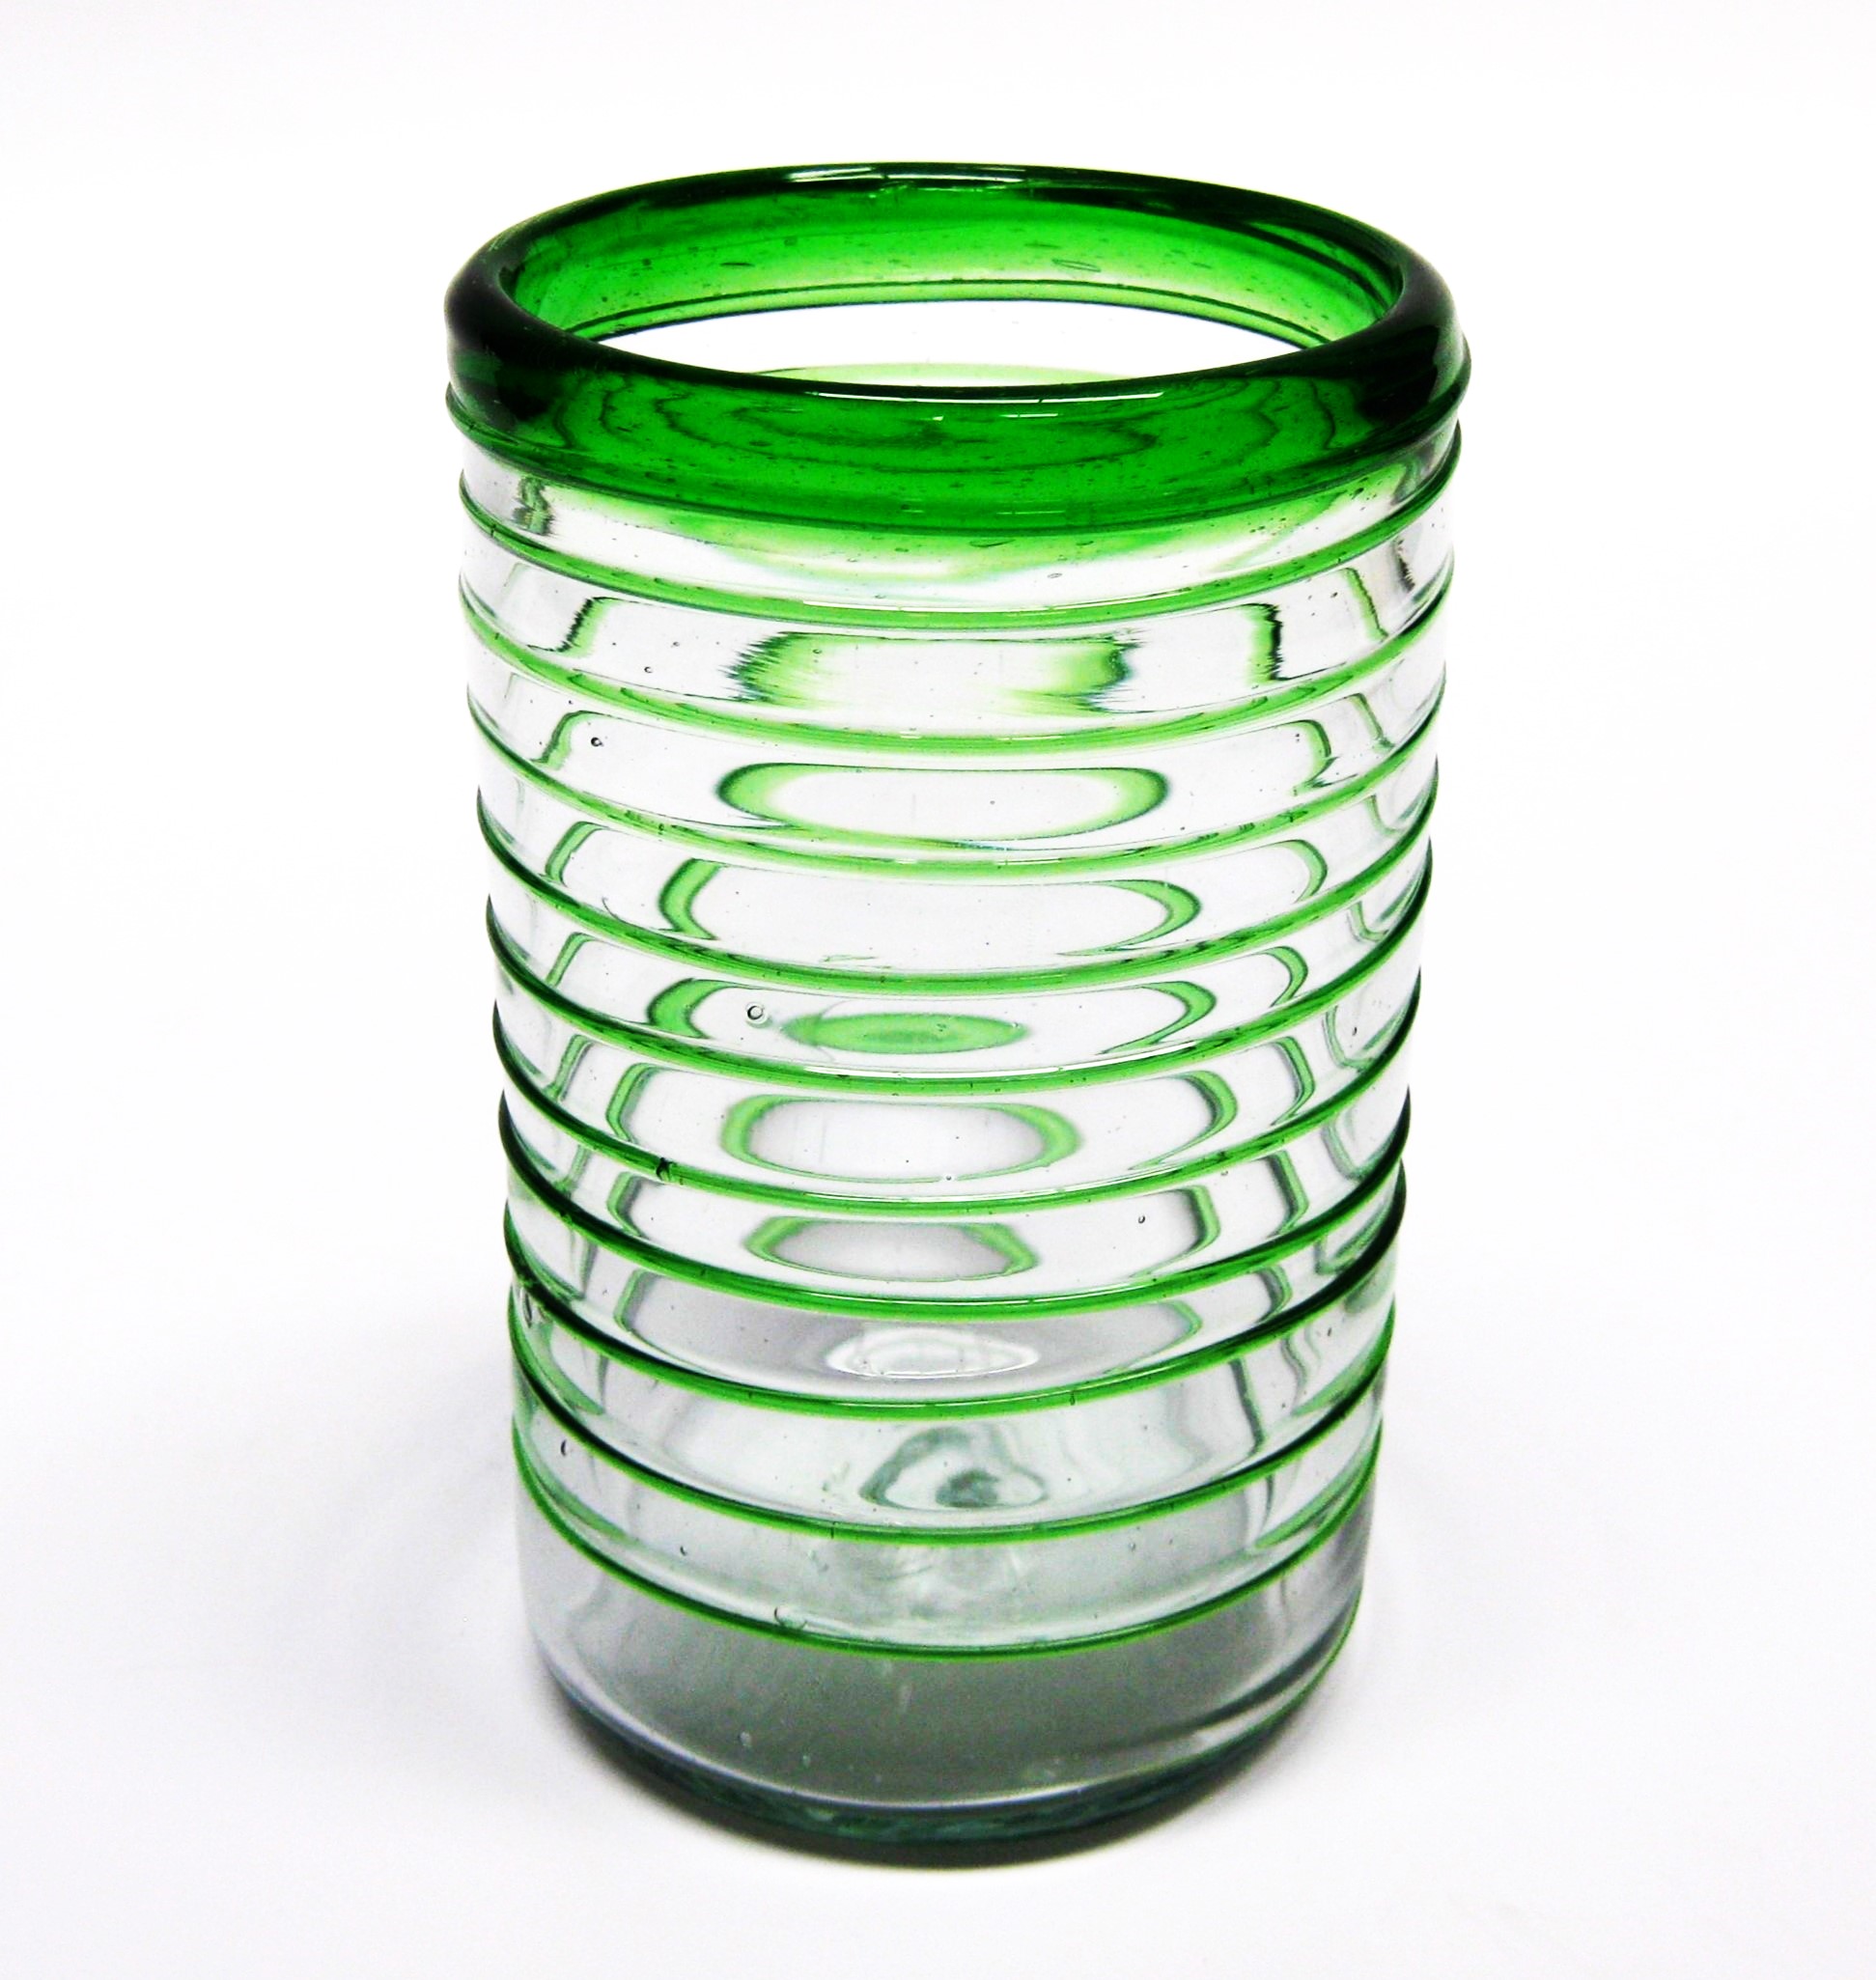 Sale Items / Emerald Green Spiral 14 oz Drinking Glasses  / These elegant glasses covered in a emerald green spiral will add a handcrafted touch to your kitchen decor.